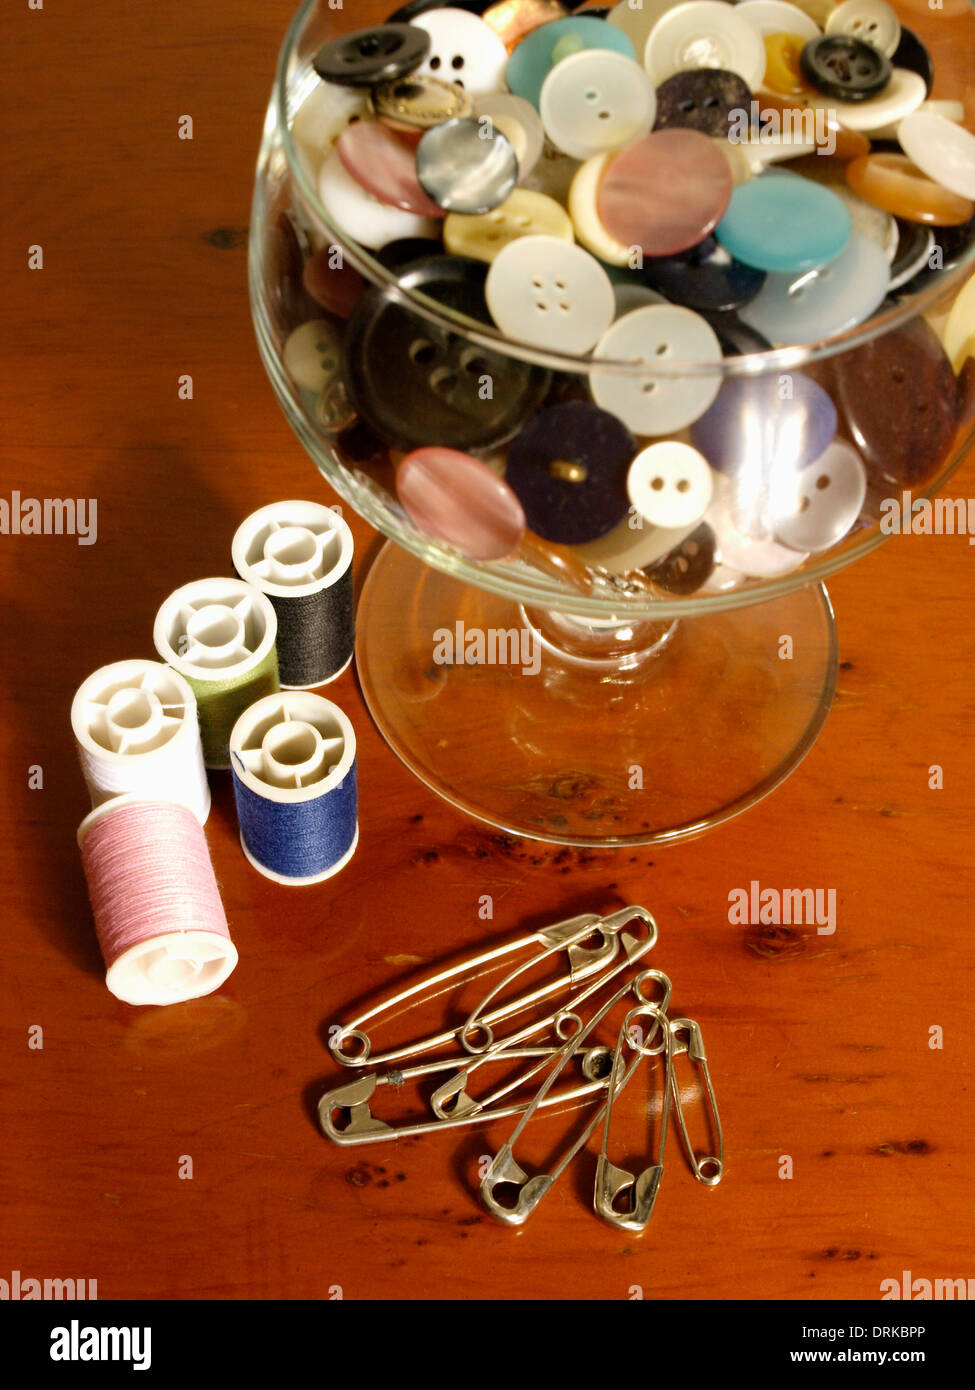 Cotton reels and buttons Stock Photo